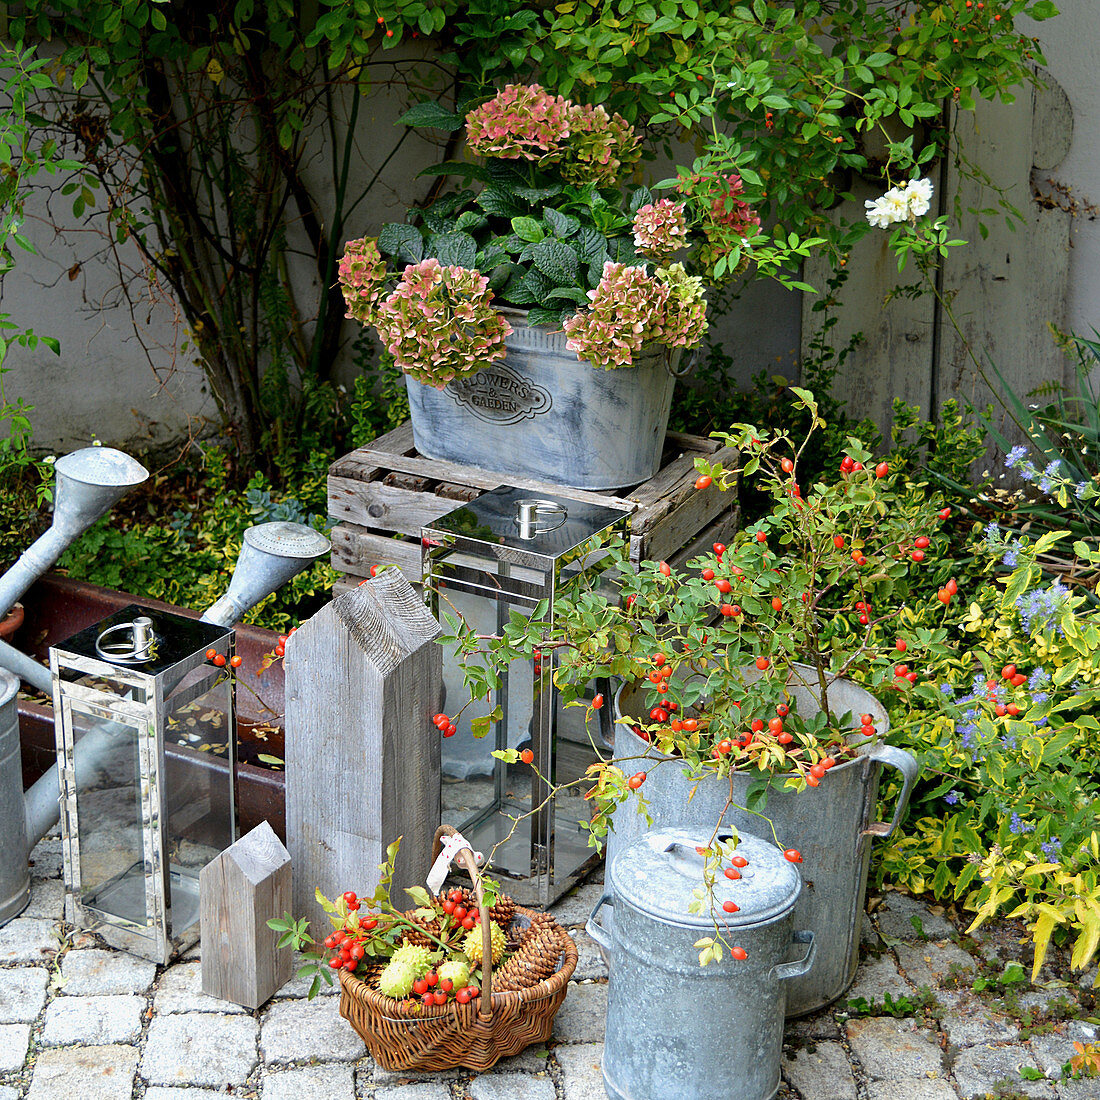 Autumn decoration with rose hips, zinc pots, and hydrangea